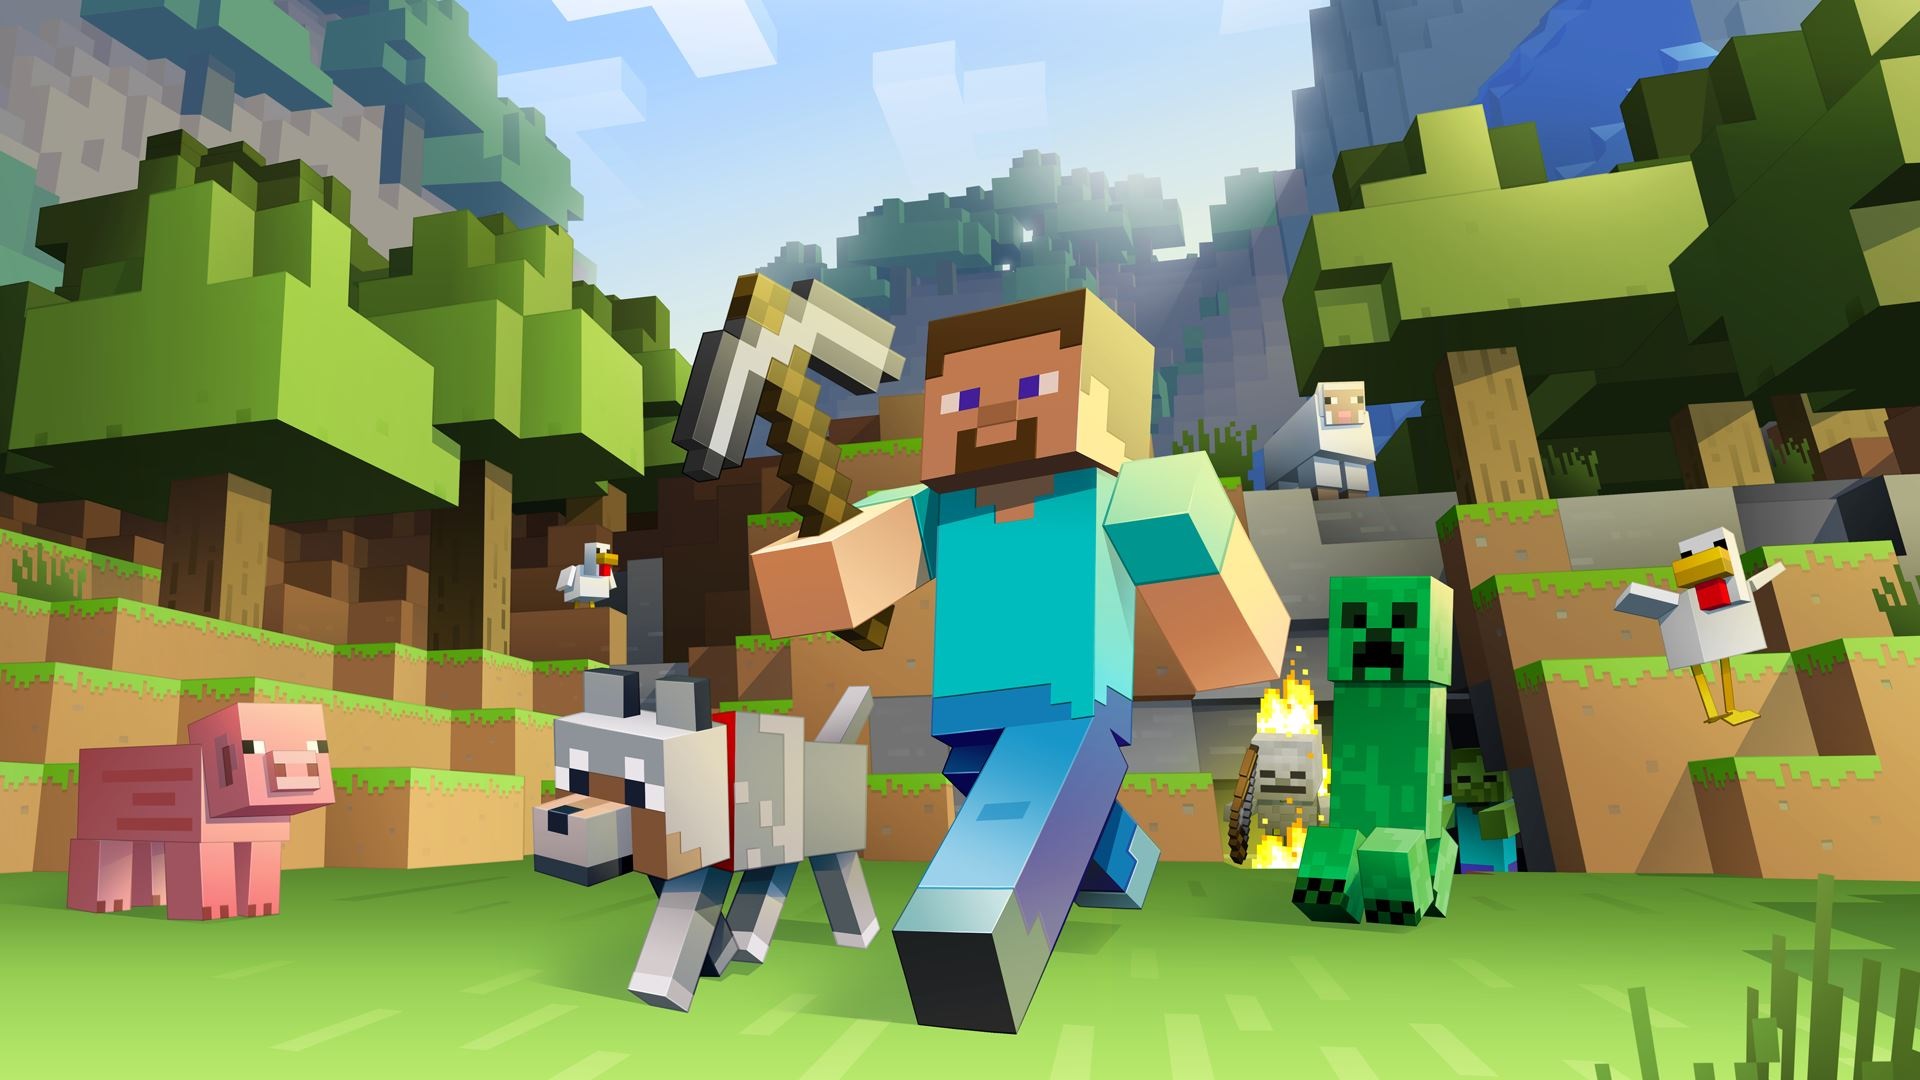 Minecraft 1.19.50: APK Download Link - Touch, Tap, Play